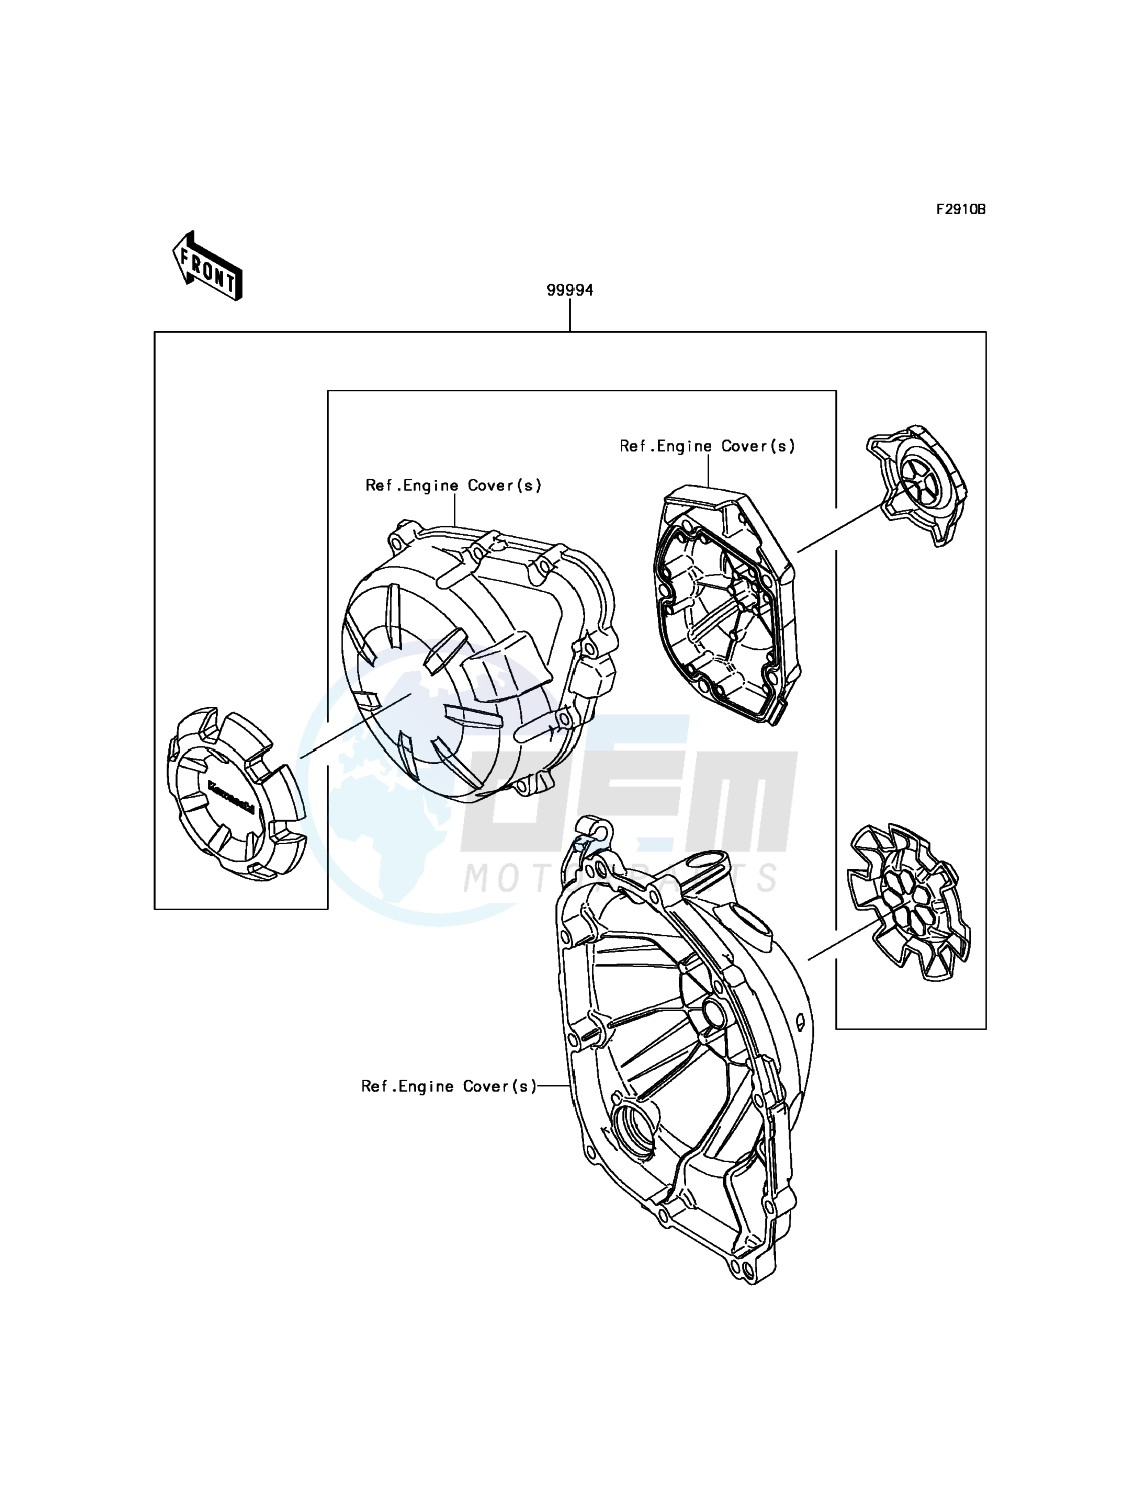 Accessory(Engine Cover Ring) blueprint